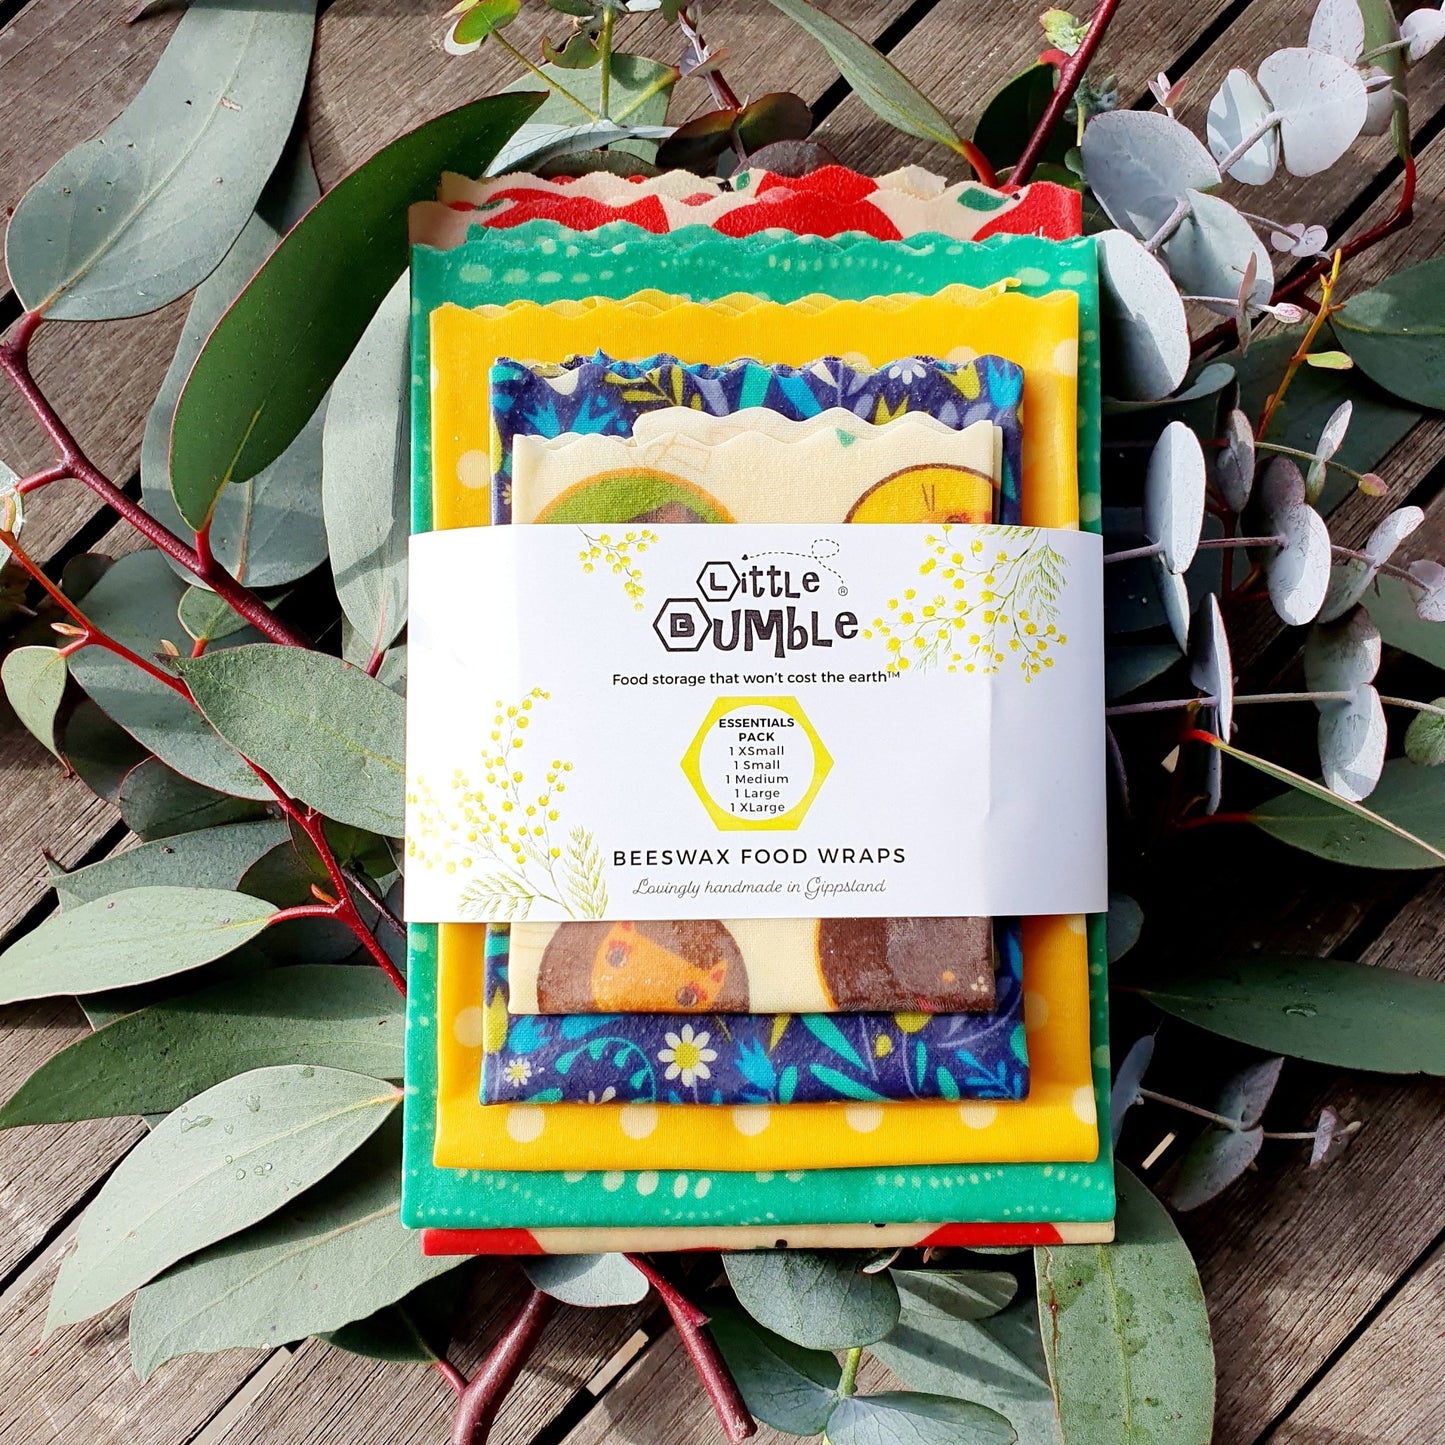 Essentials Pack (Everyday set) - 5 beeswax wraps ideal for every household, wrap avos through to celery! - Little Bumble Reusable Food Wraps